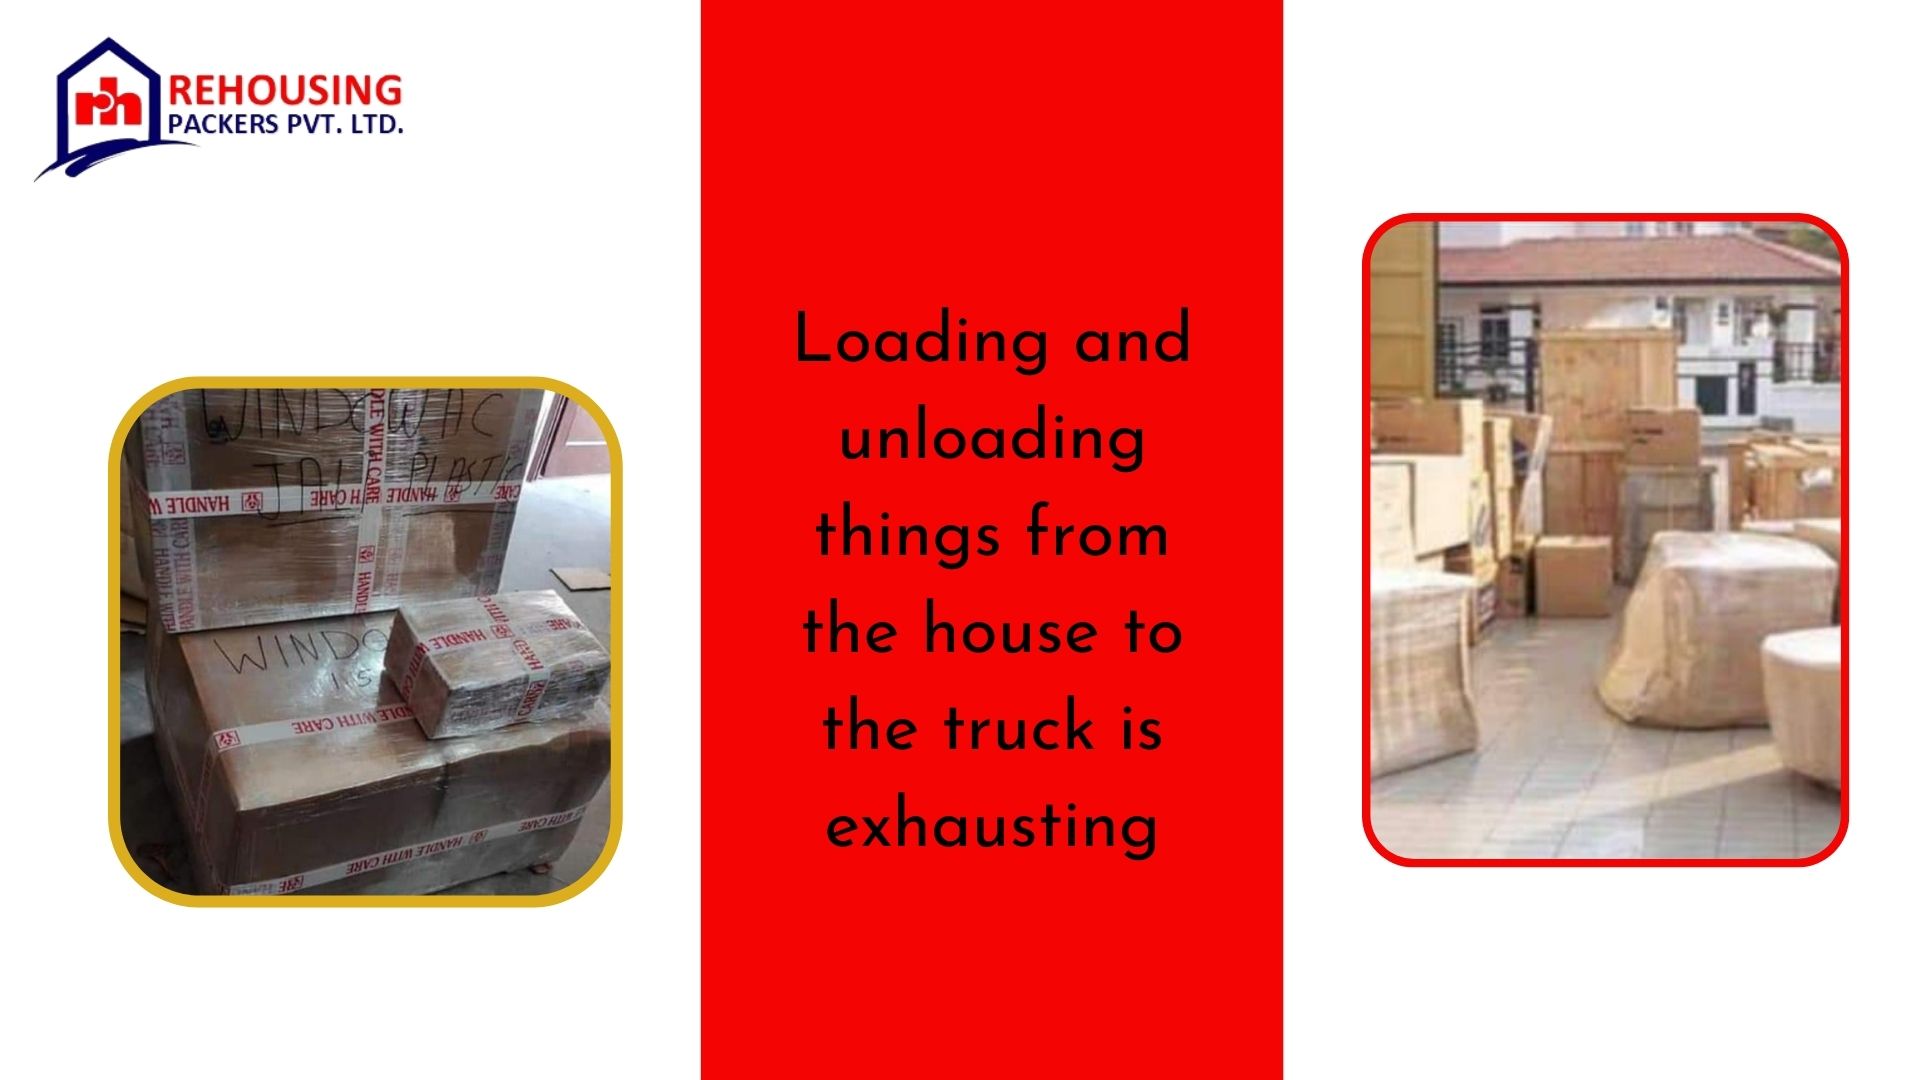 Packers and Movers from Gurgaon to Hyderabad